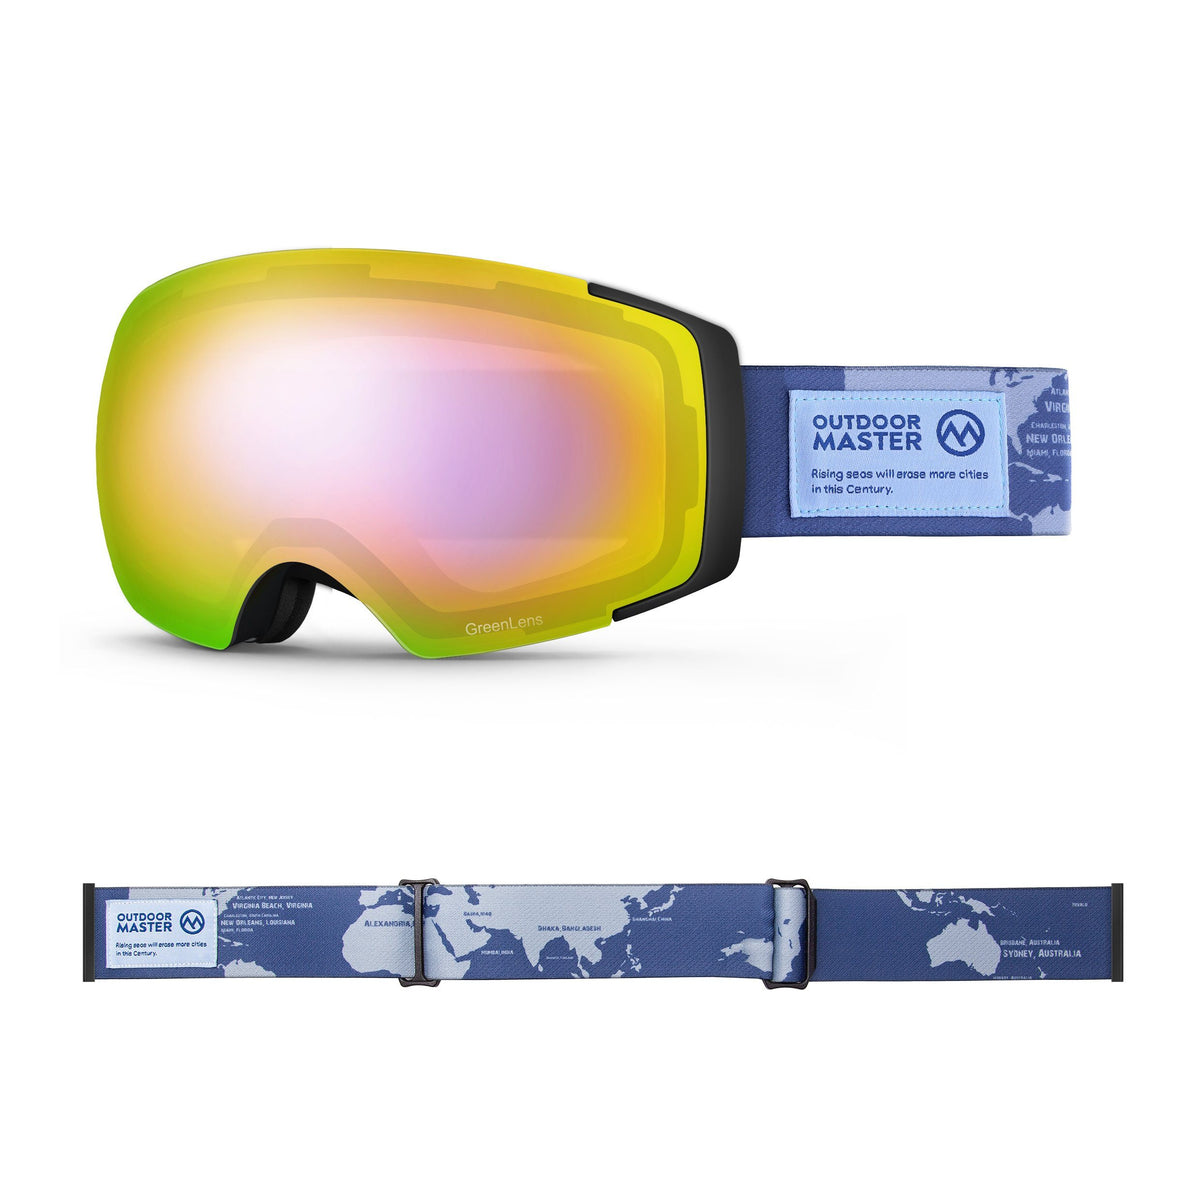 Eco-friendly Ski Goggles Pro Series - The Disappearing Places/Classic BambooStraps Limited Edition OutdoorMaster GreenLens VLT 45% TAC Purple with REVO Red Polarized The Disappearing Places